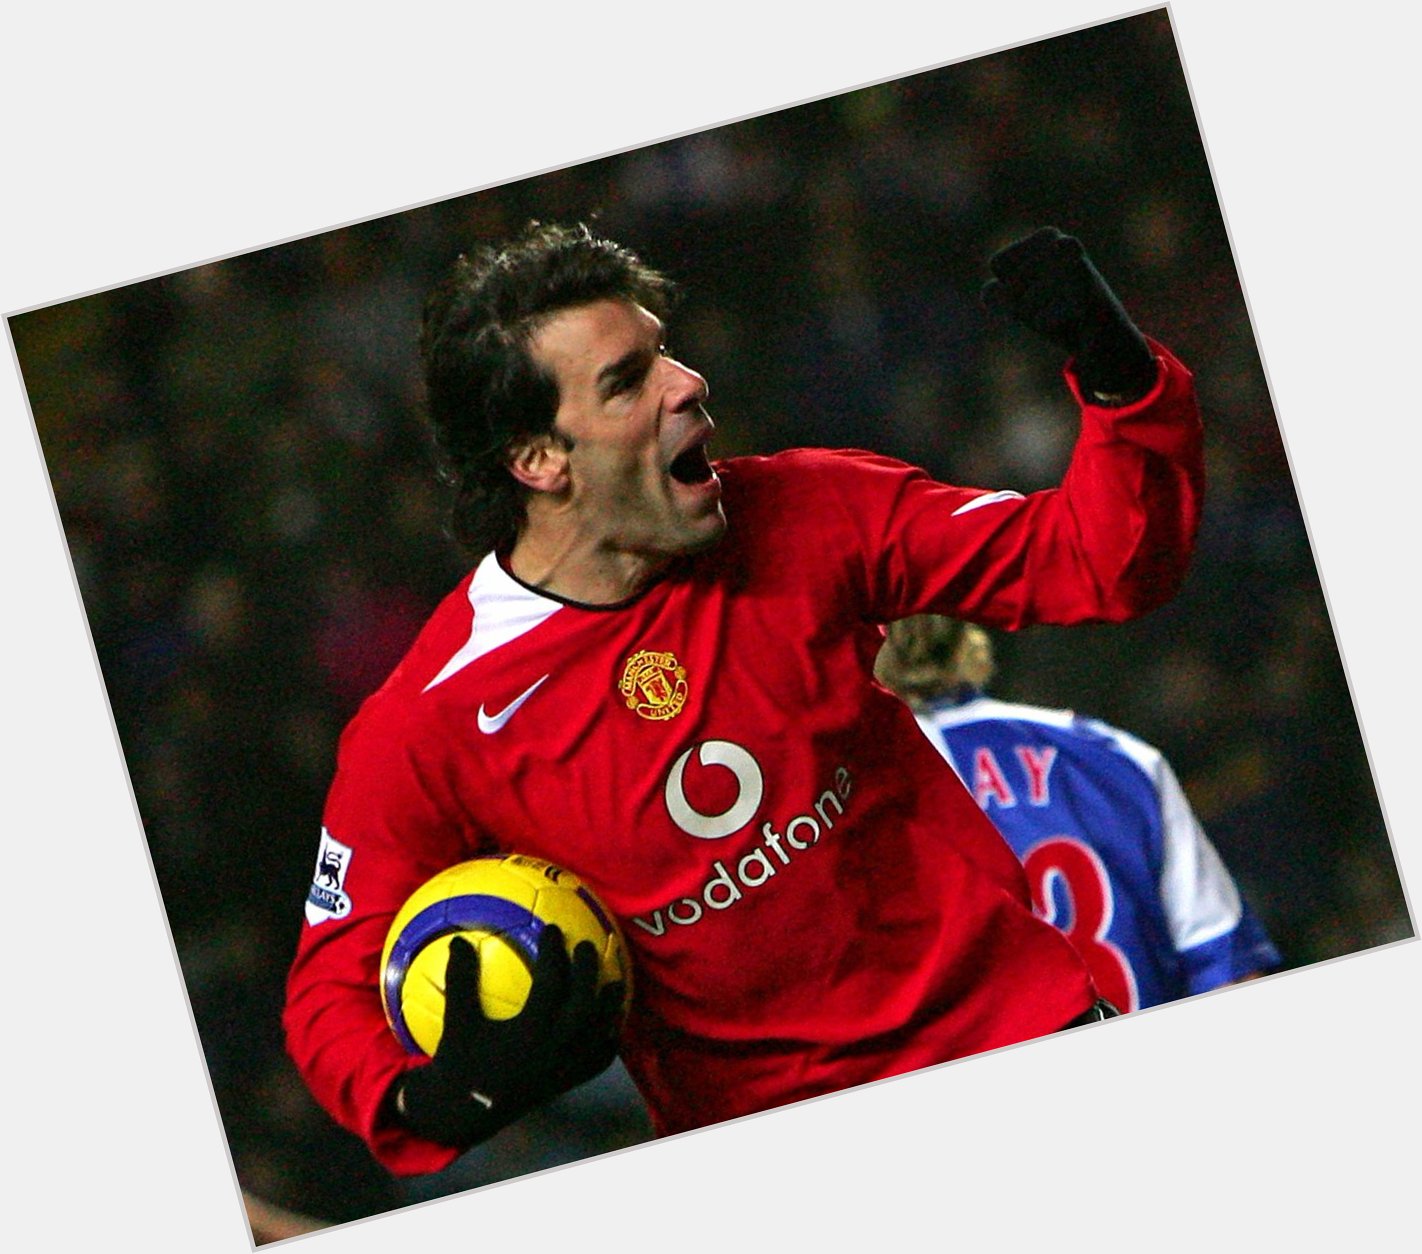 Happy 44rth birthday to Ruud van Nistelrooy. What a player he was.    